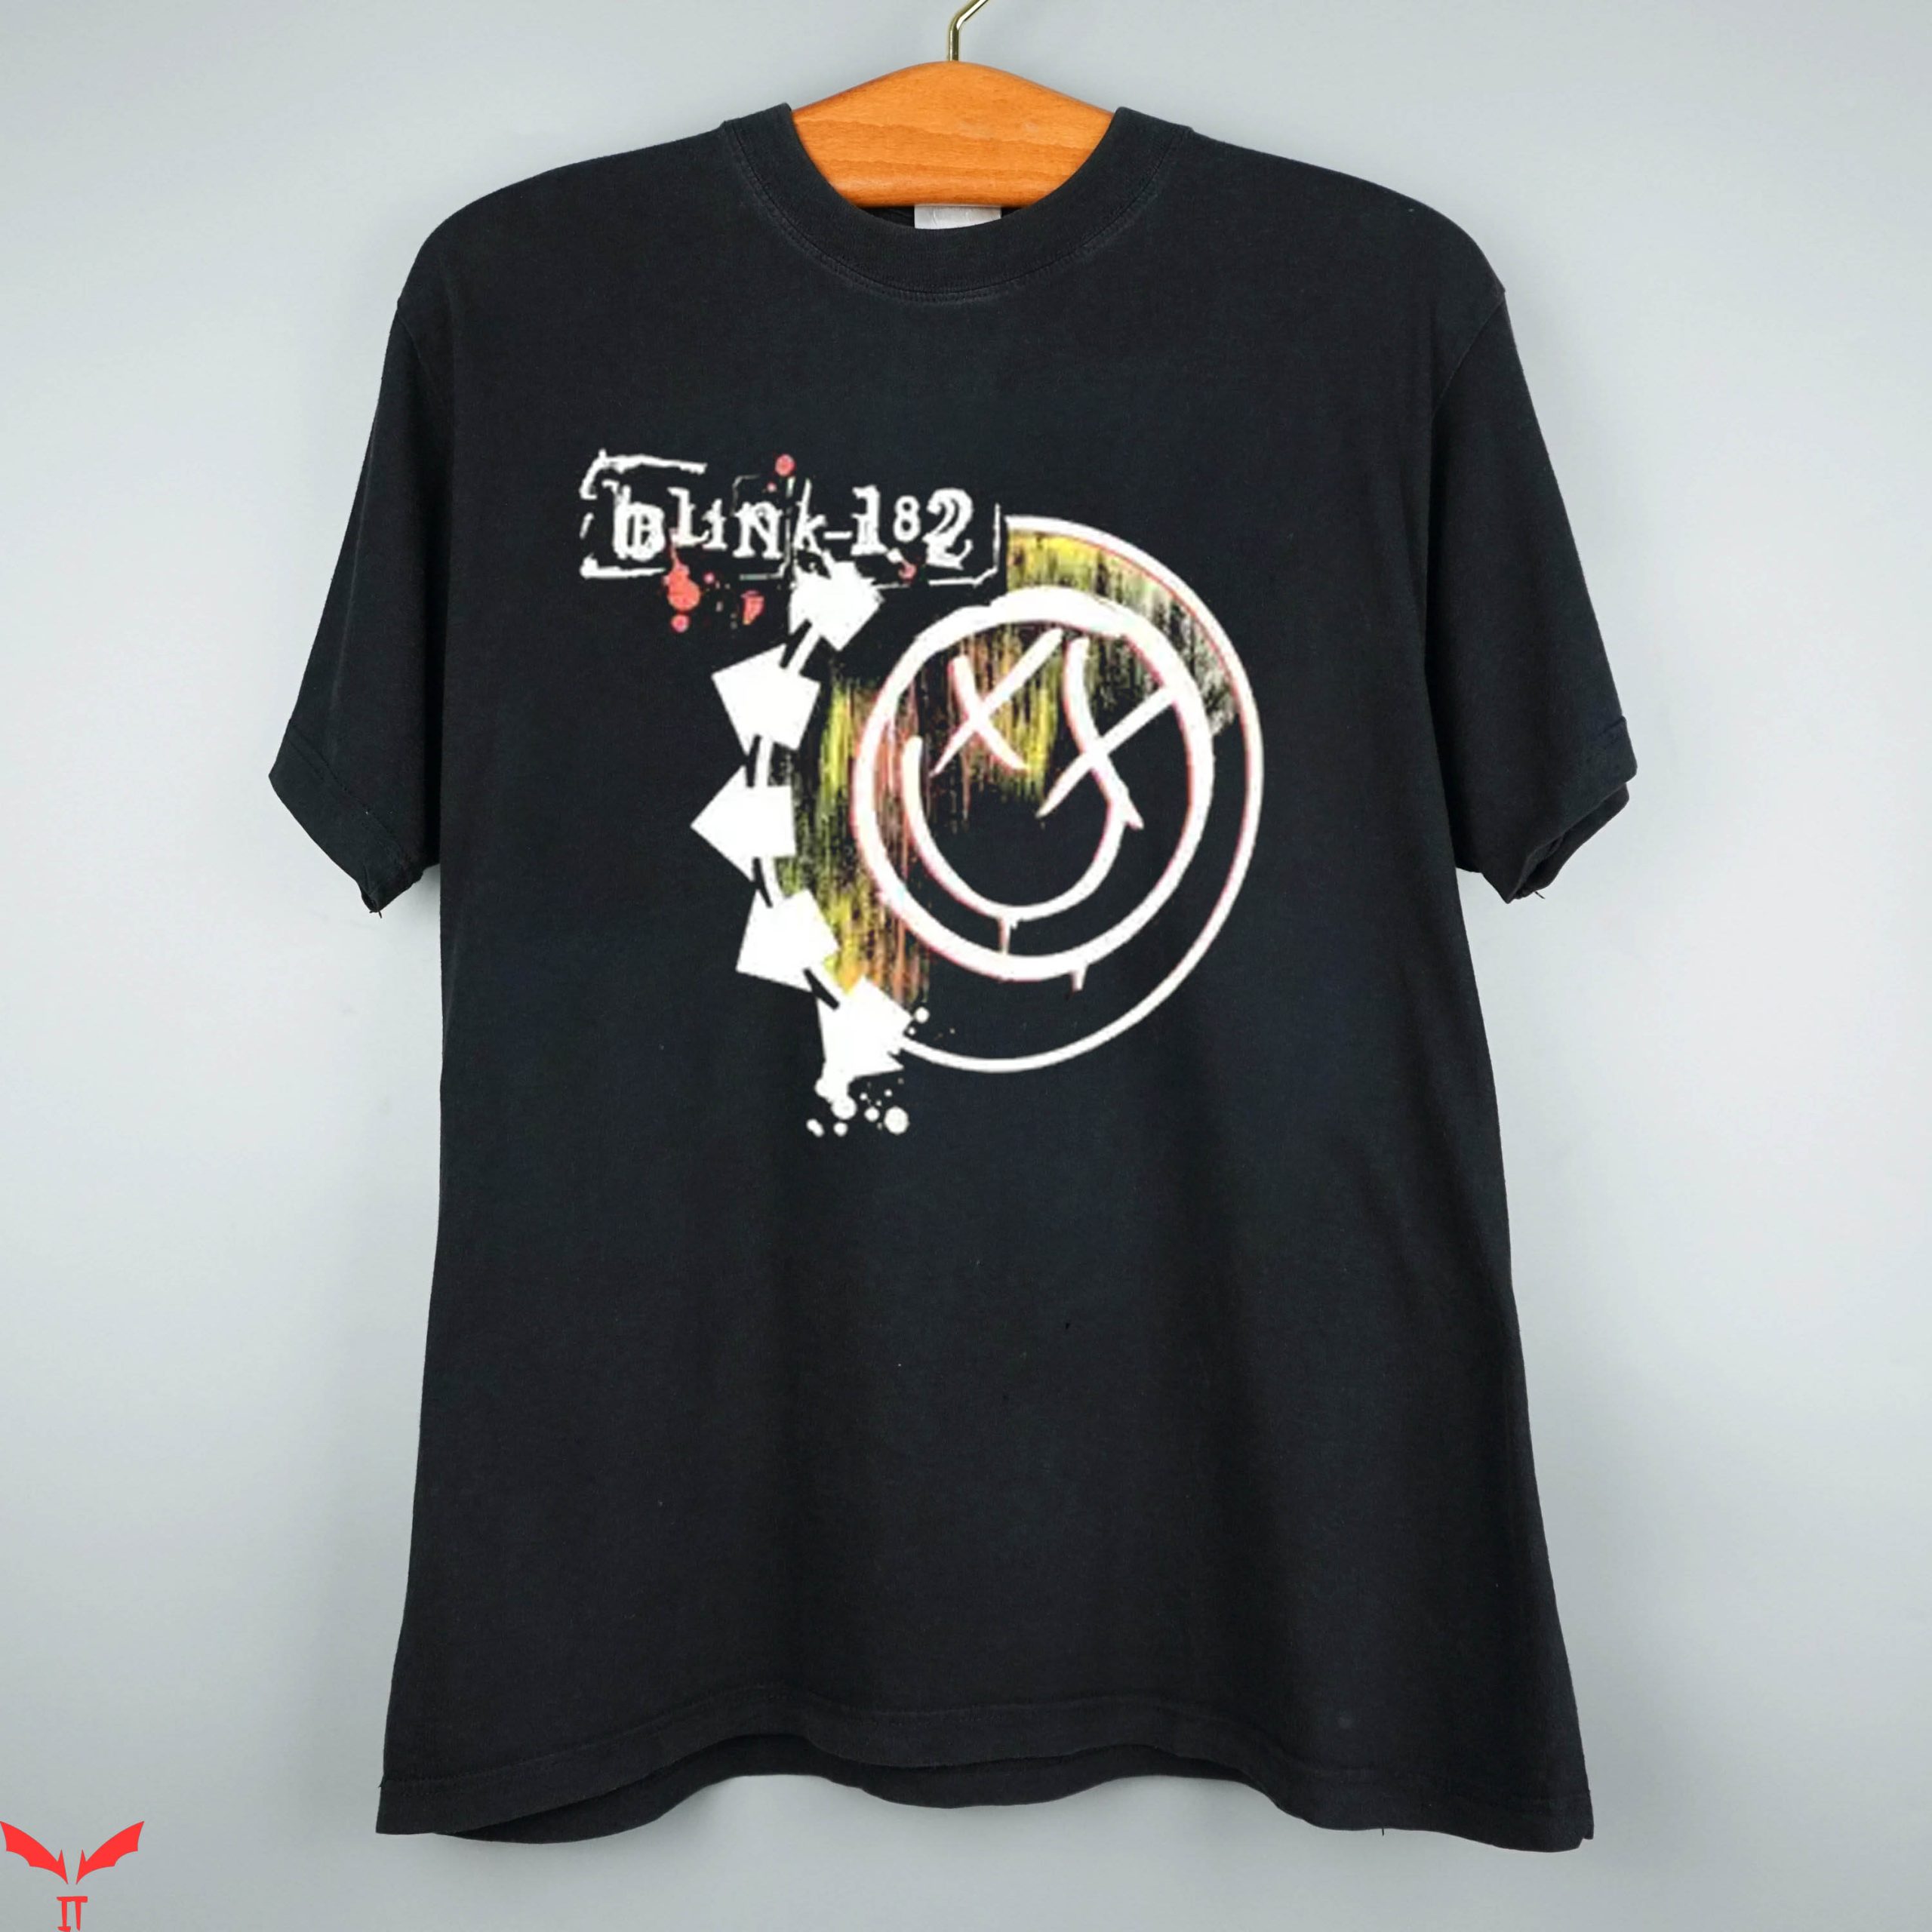 Blink 182 T-Shirt Vintage Rock Band 90s Trendy Style Tee